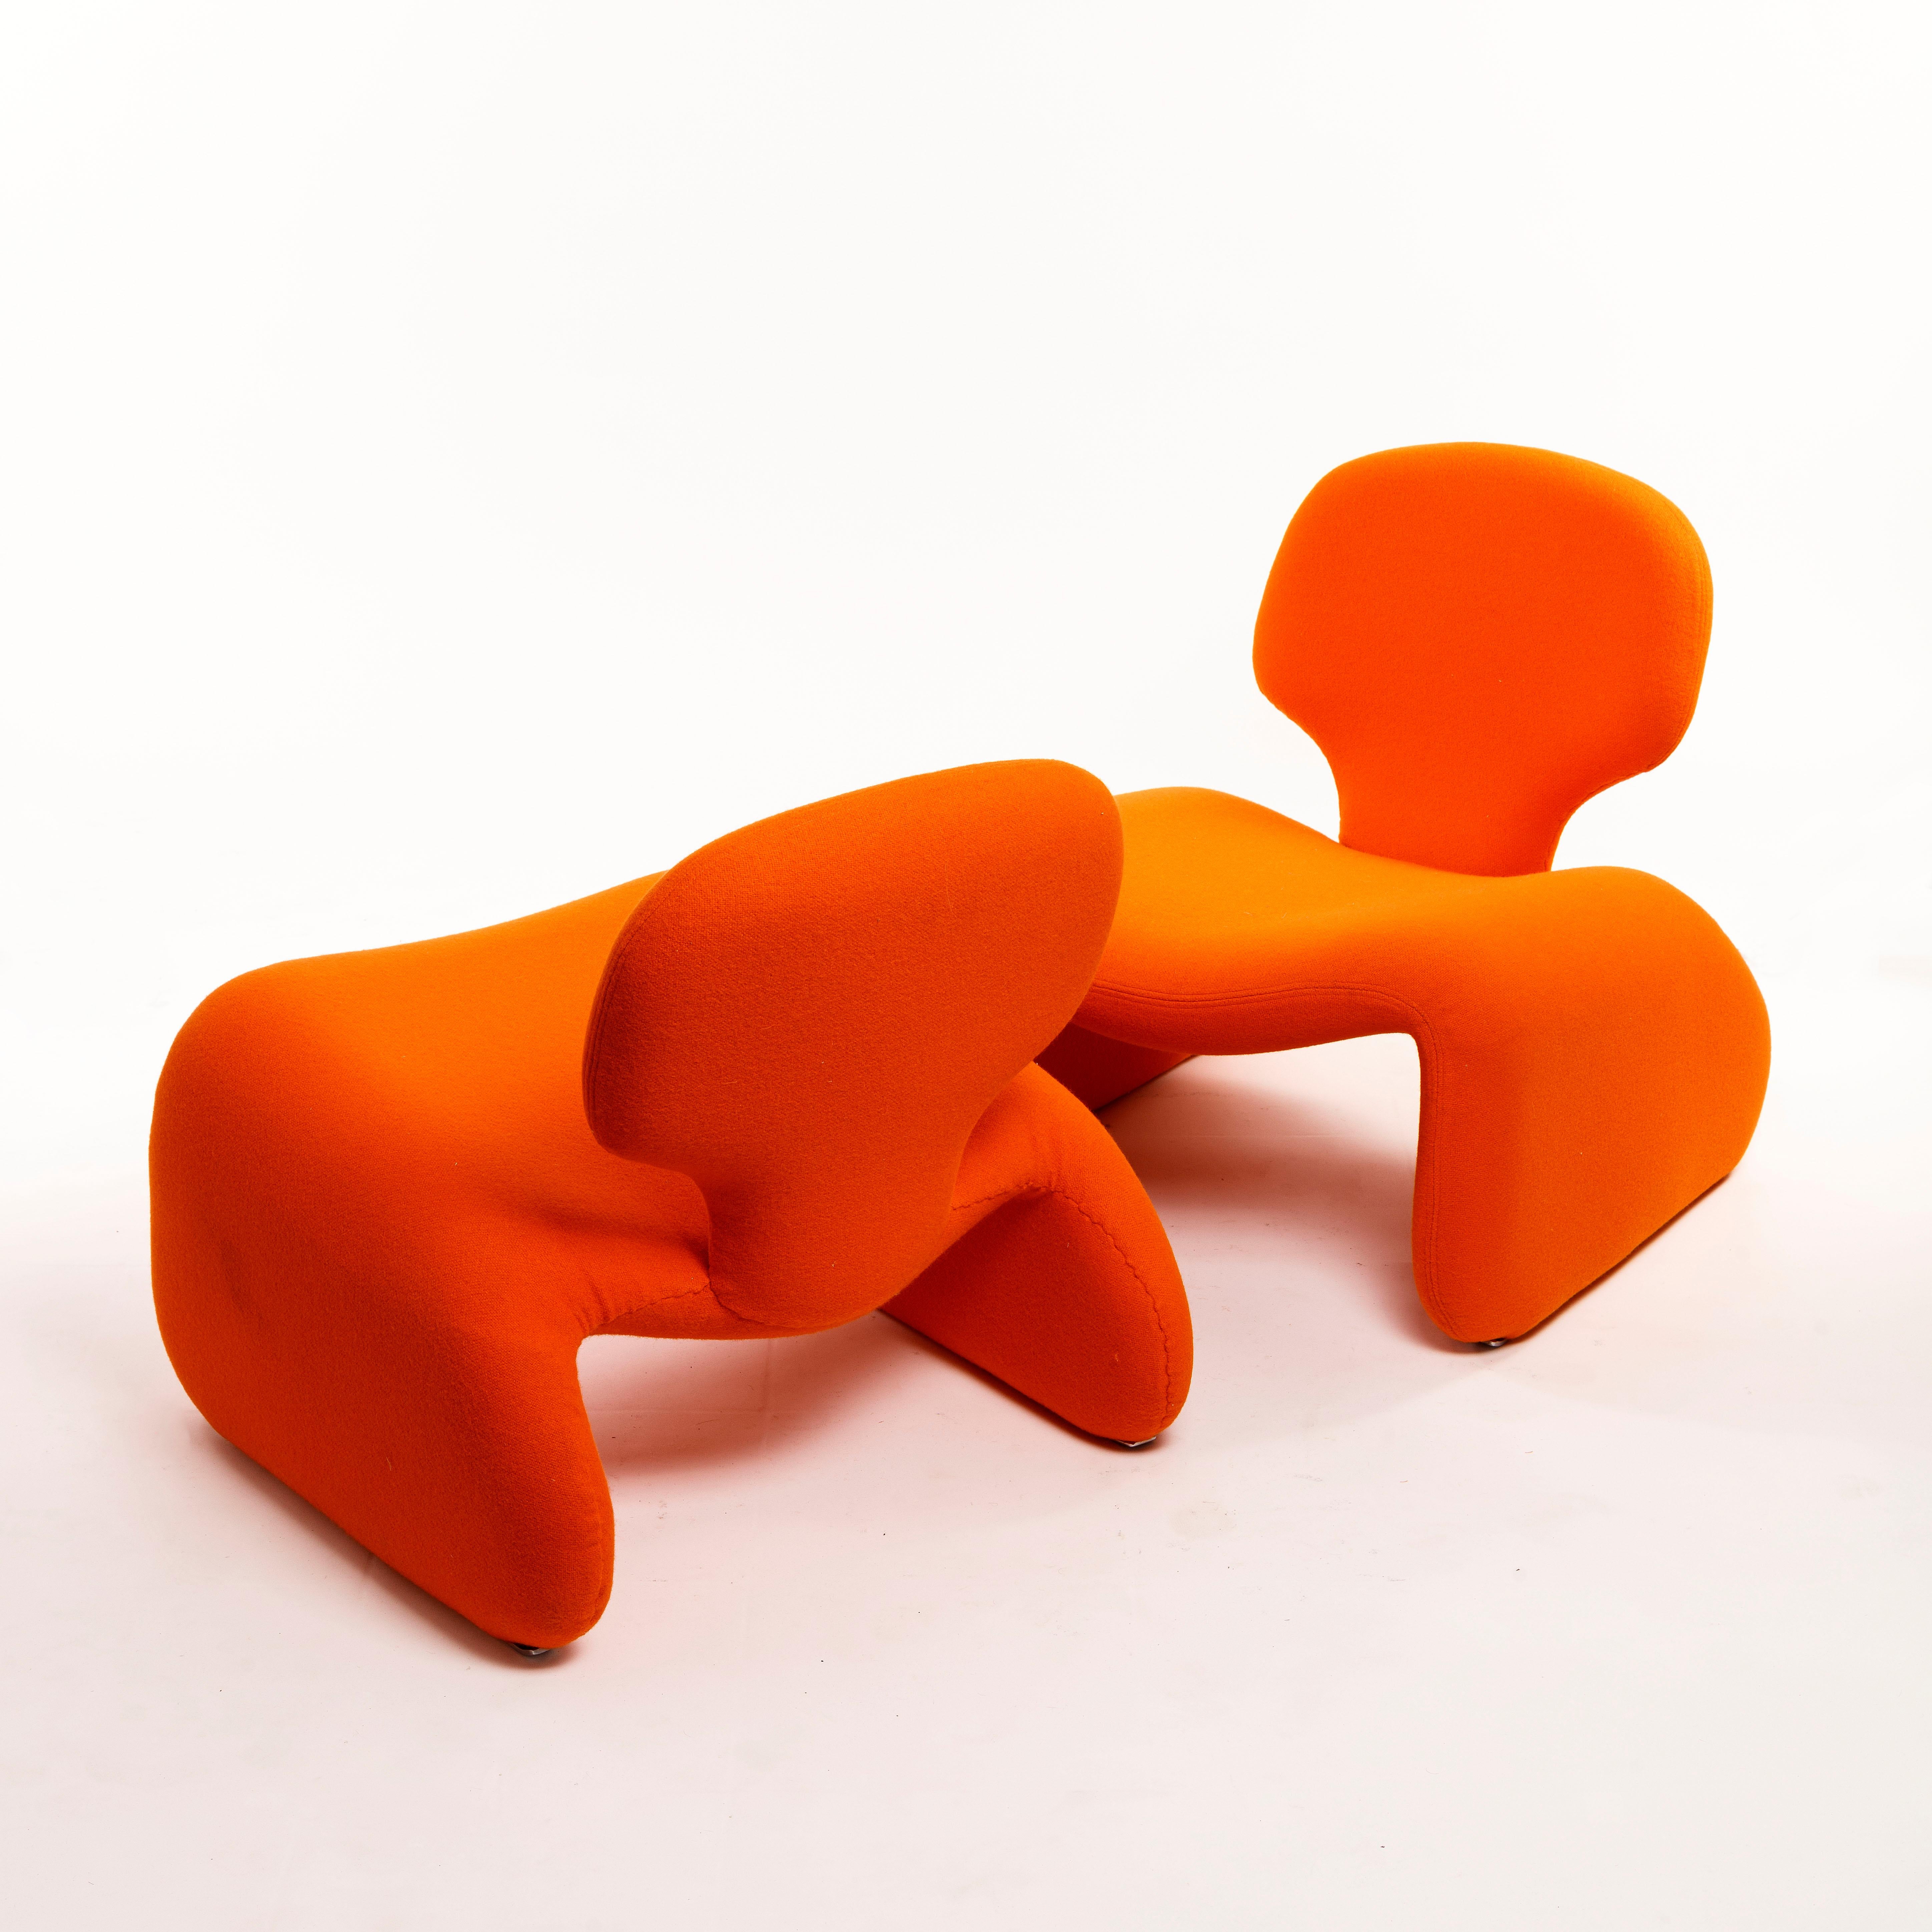 Steel Olivier Mourgue Iconic Djinn Chair Airborne 1963 Reupholstered in Orange Kvadrat For Sale